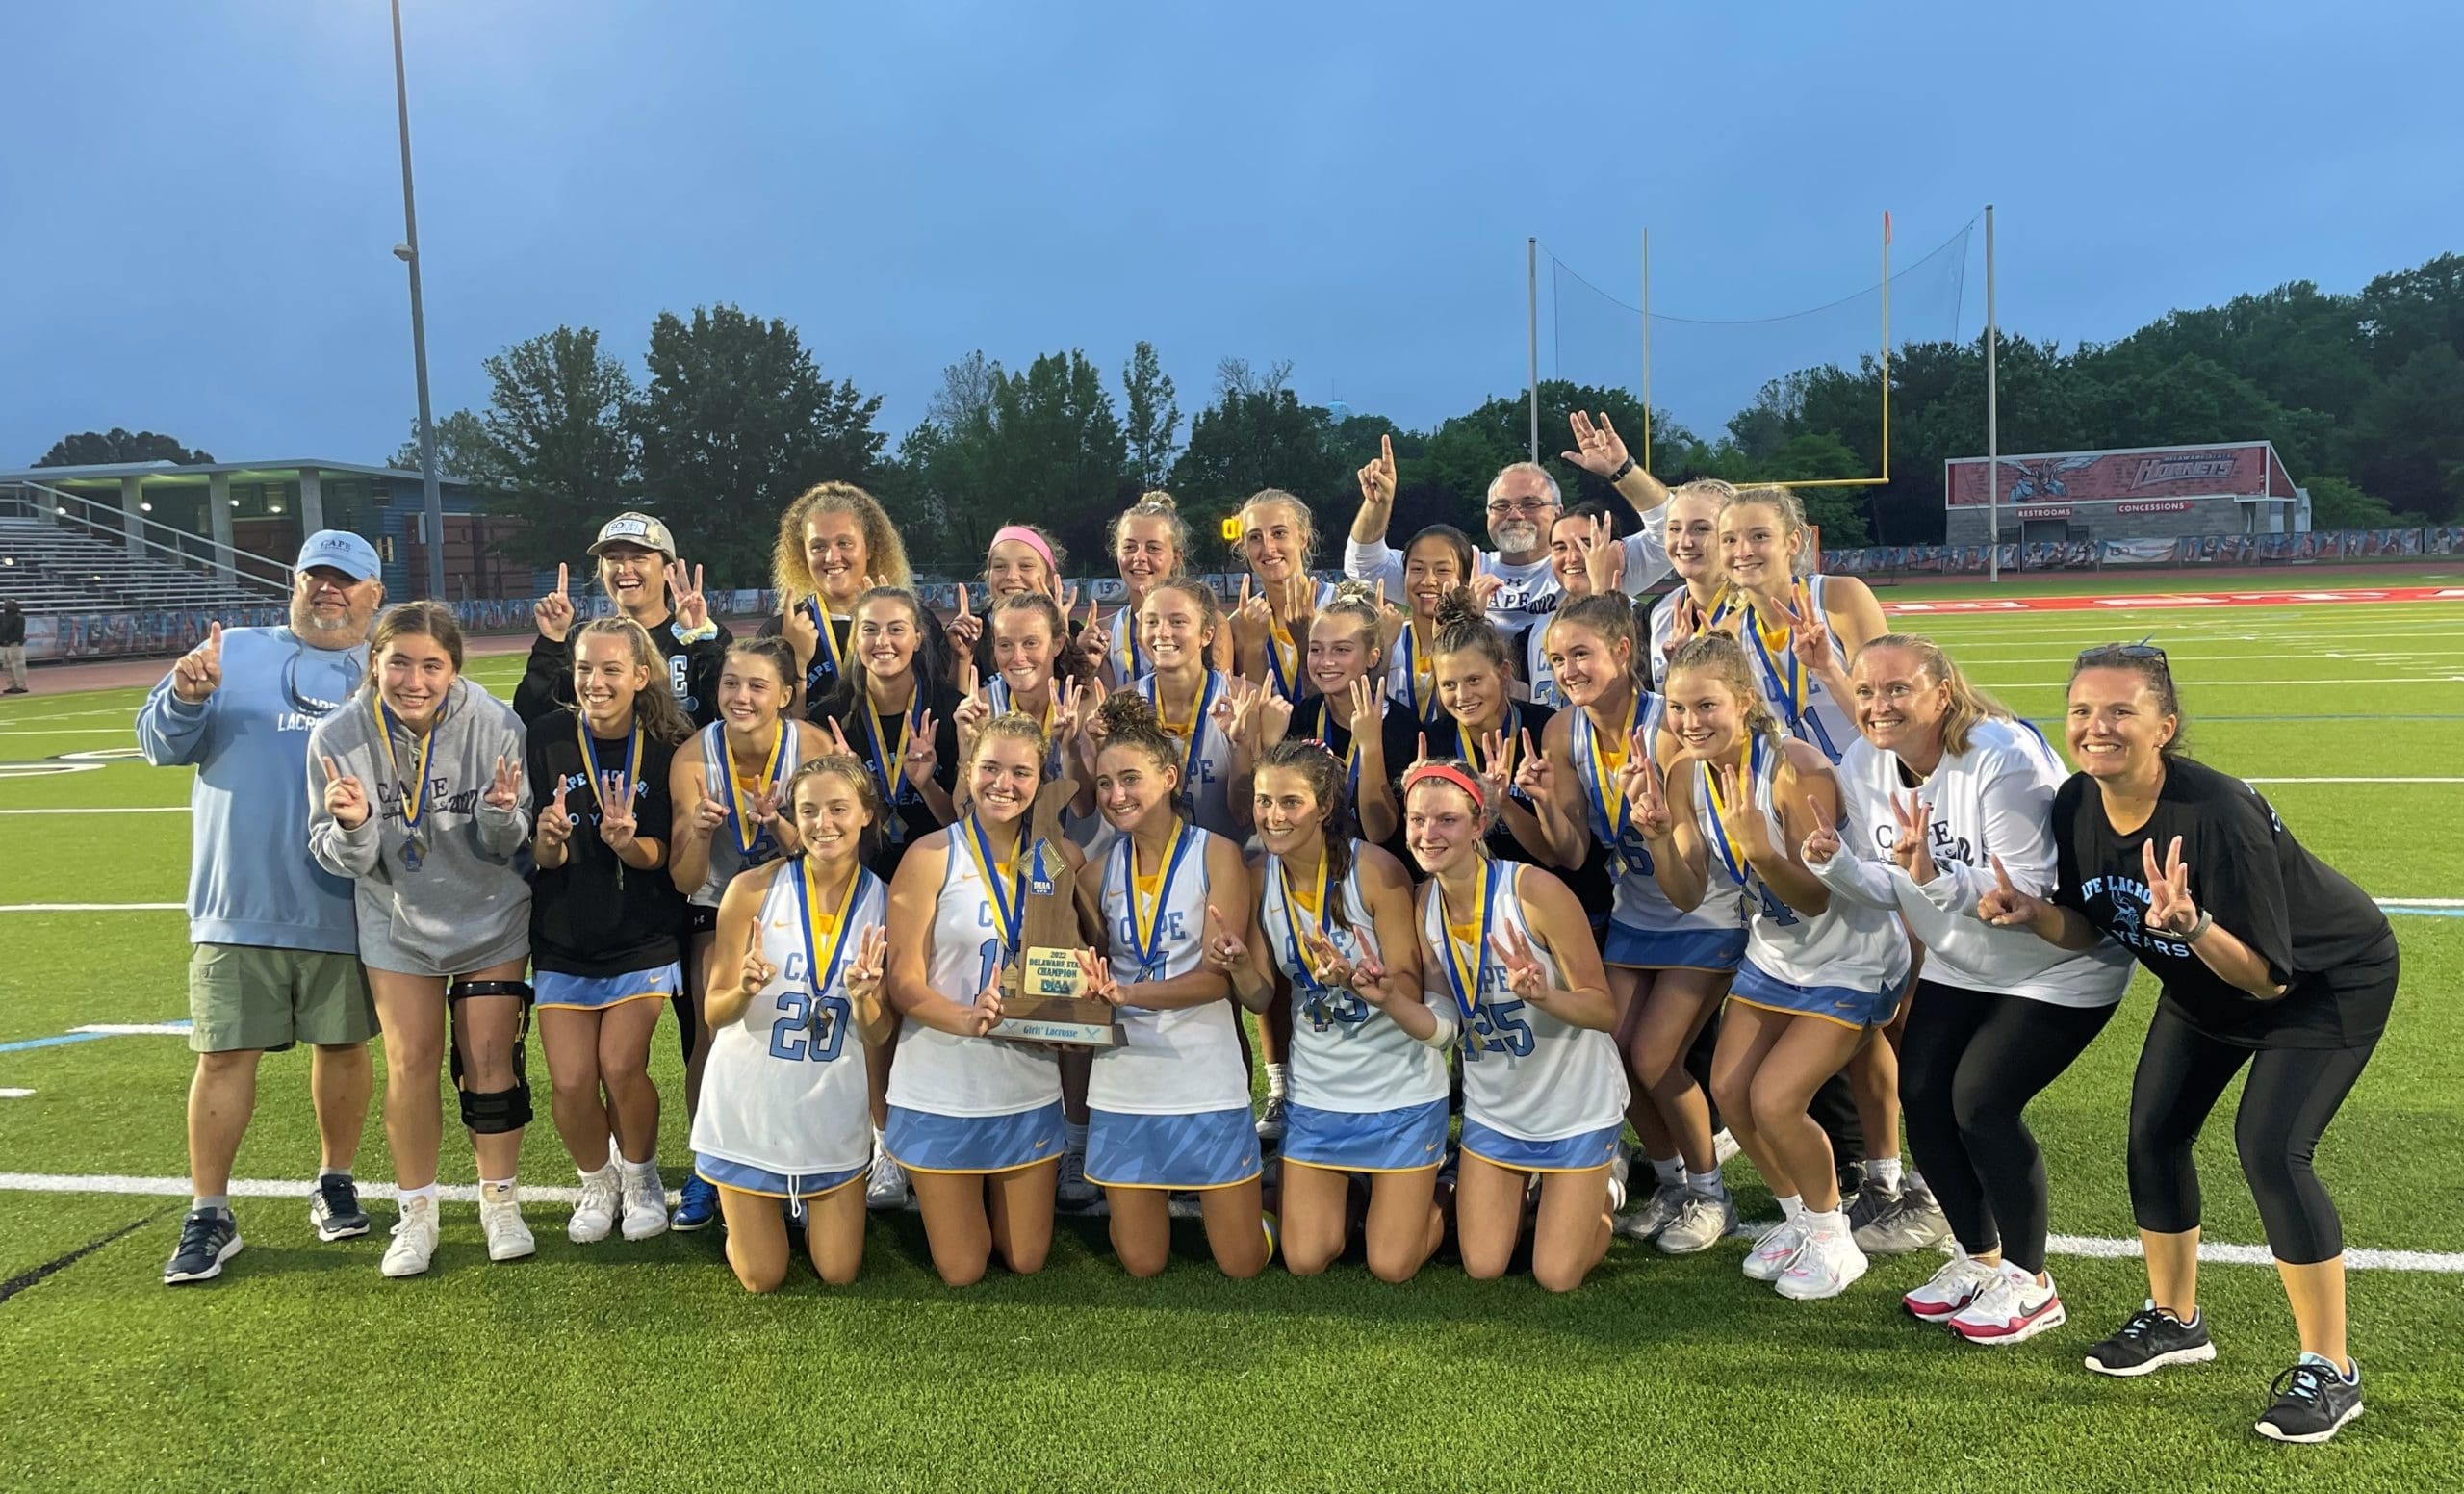 Featured image for “Cape captures lucky No. 13 lacrosse championship”